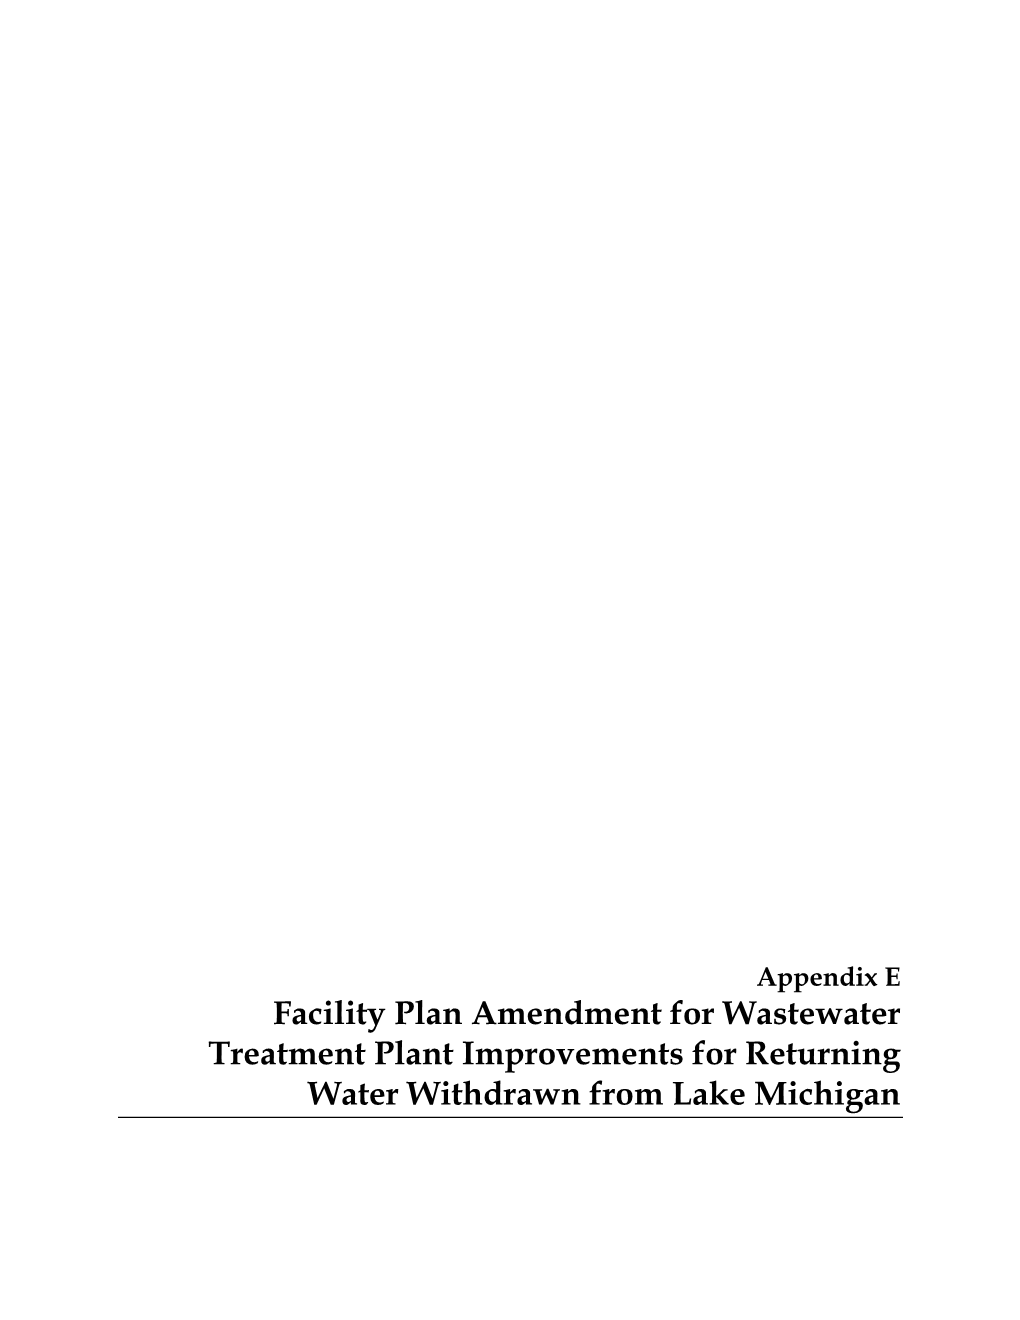 Facility Plan Amendment for Wastewater Treatment Plant Improvements for Returning Water Withdrawn from Lake Michigan